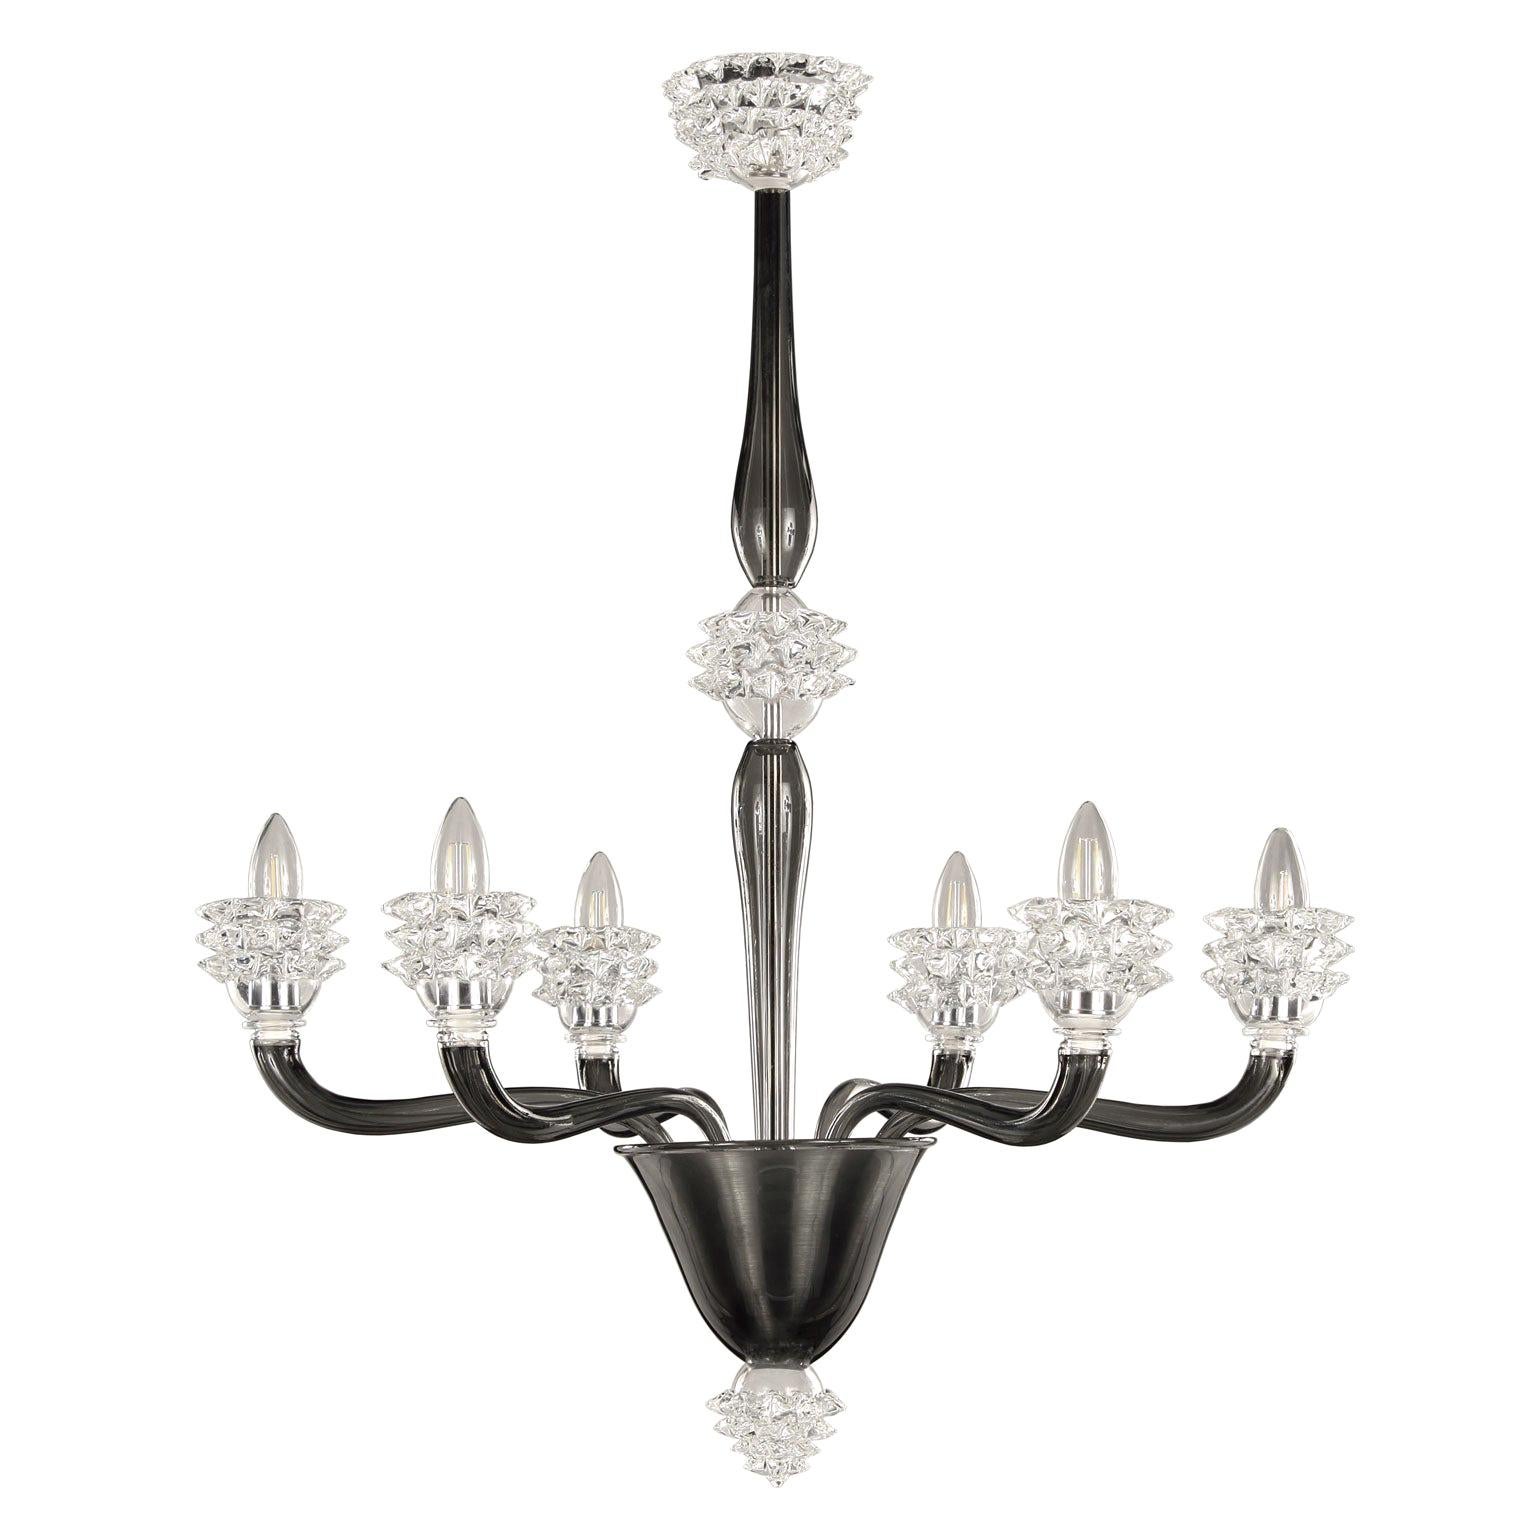 Italian Chandelier 6 arms Dark Grey and clear Rostri Murano Glass by Multiforme For Sale